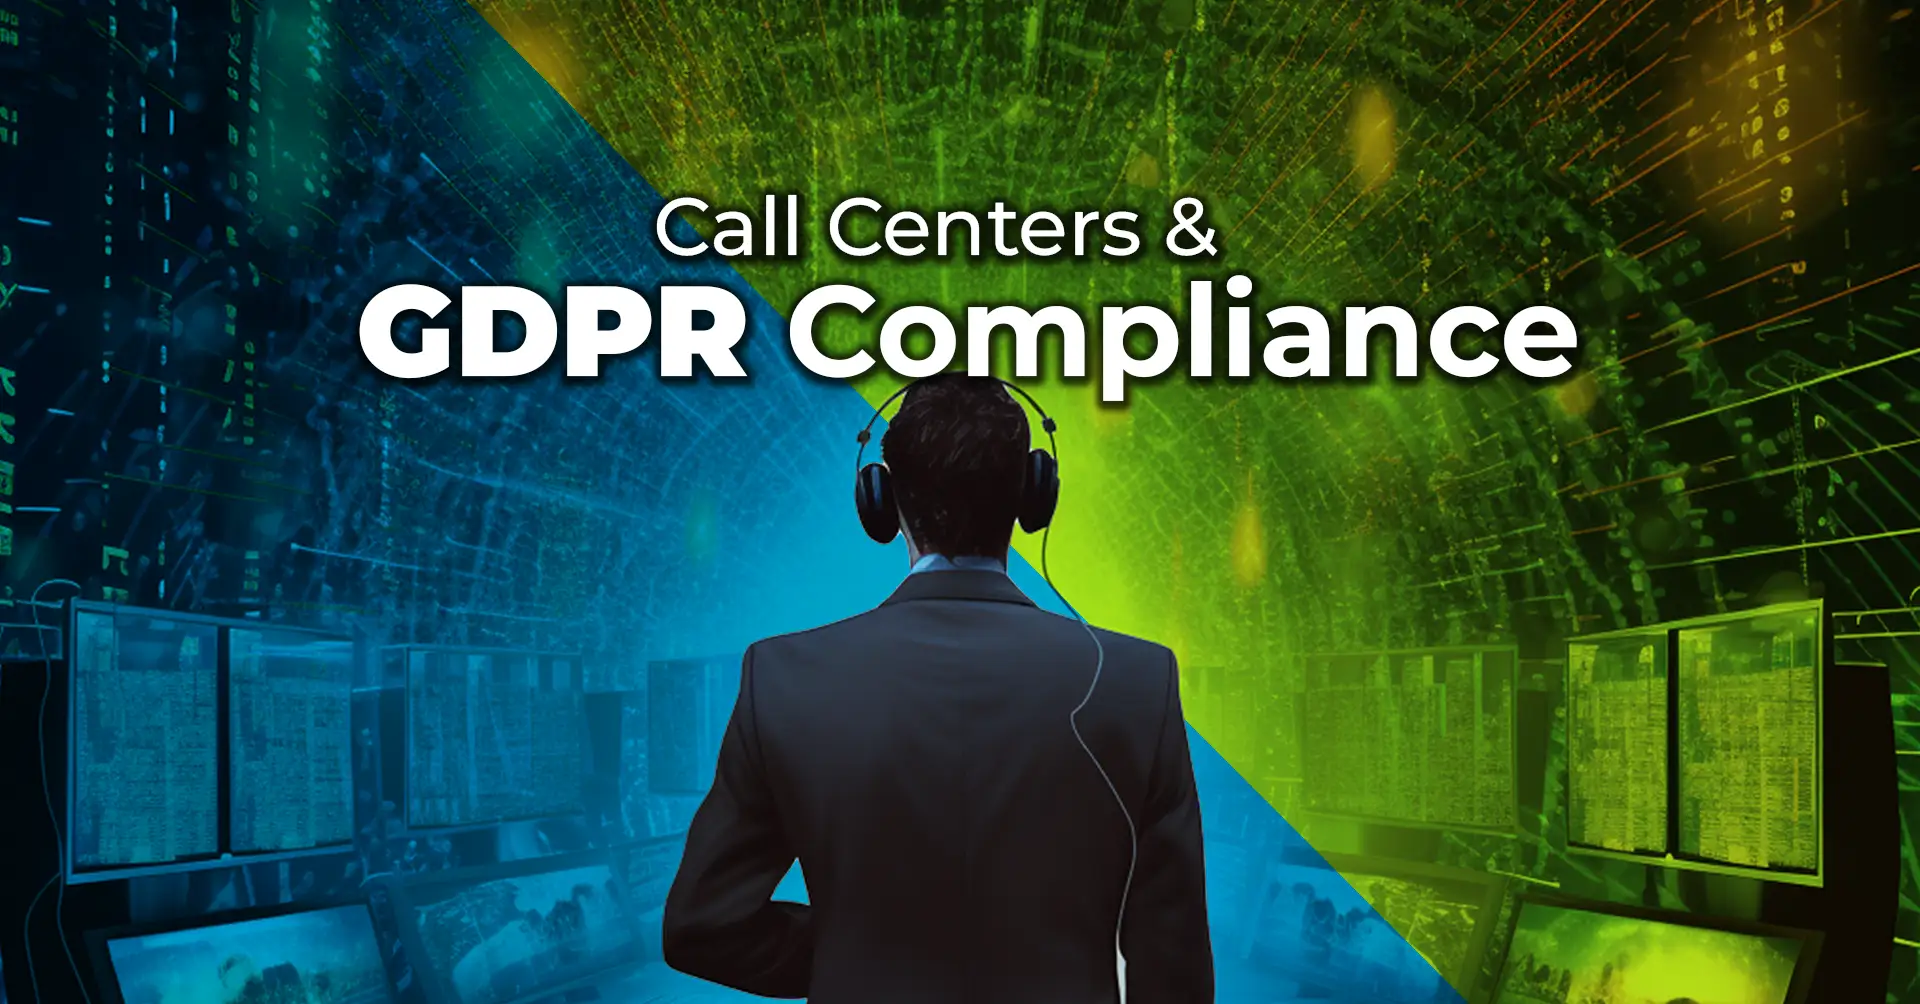 GDPR compliance in call centers